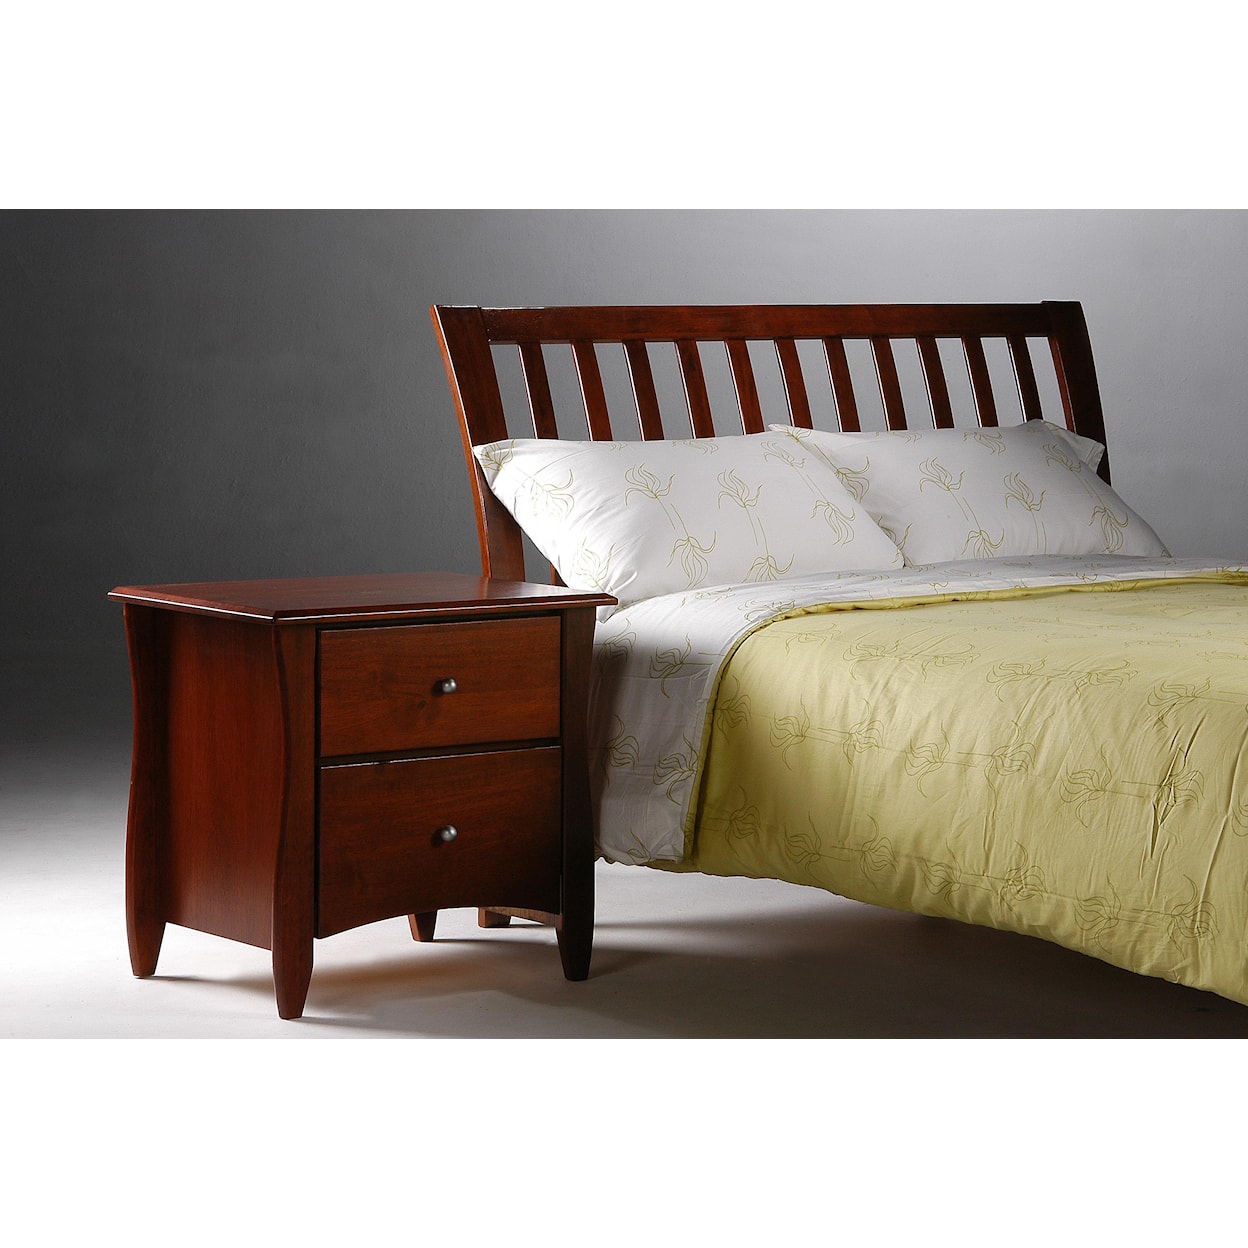 Night & Day Furniture Spice California King Bed